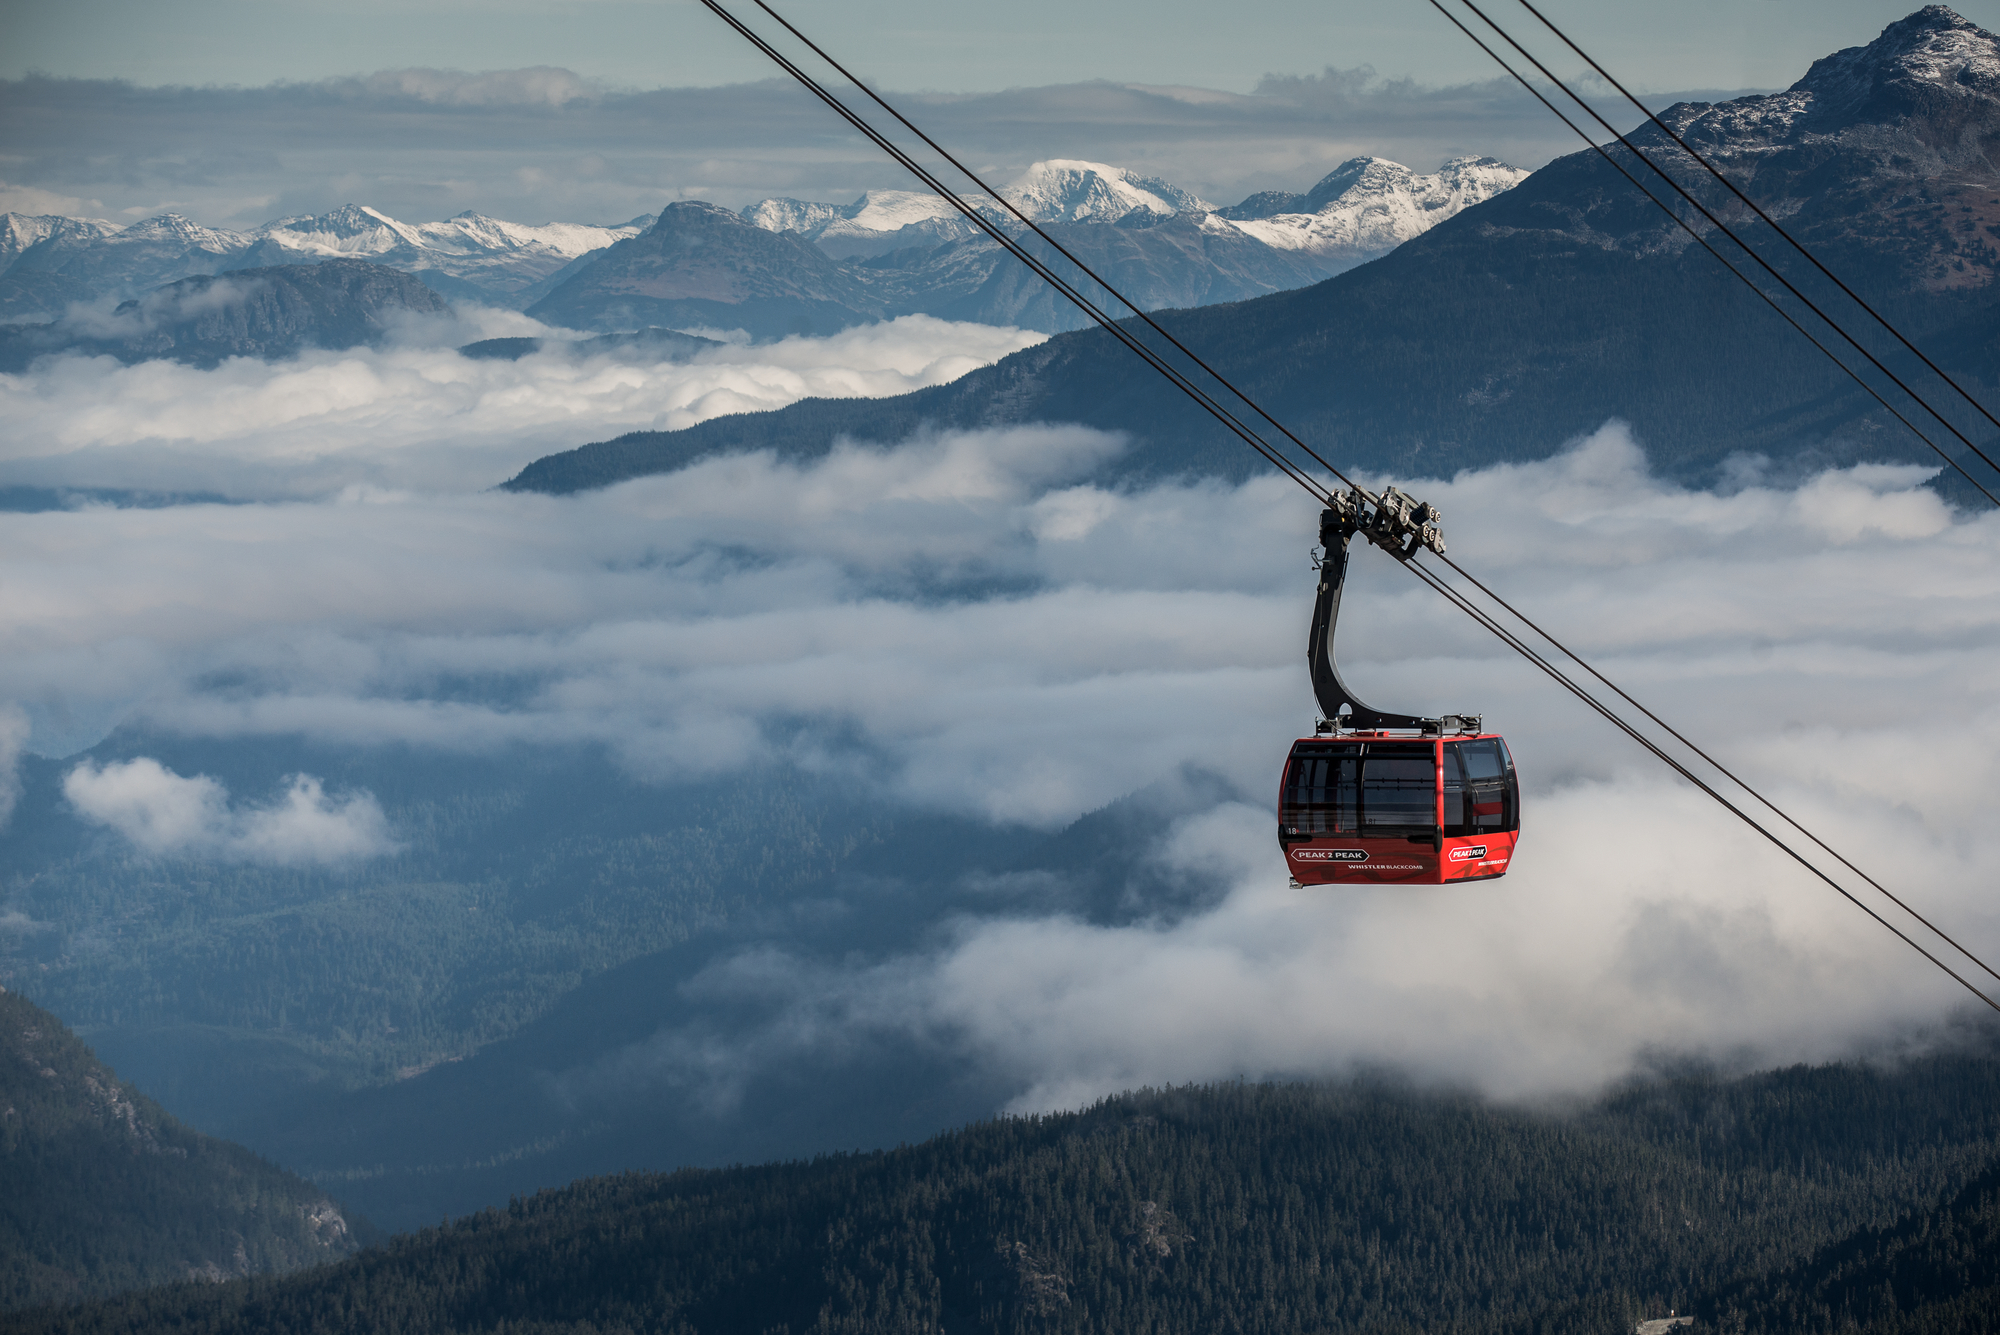 The red Peak to Peak Gondola in Whistler rising above the clouds on the gondola line.